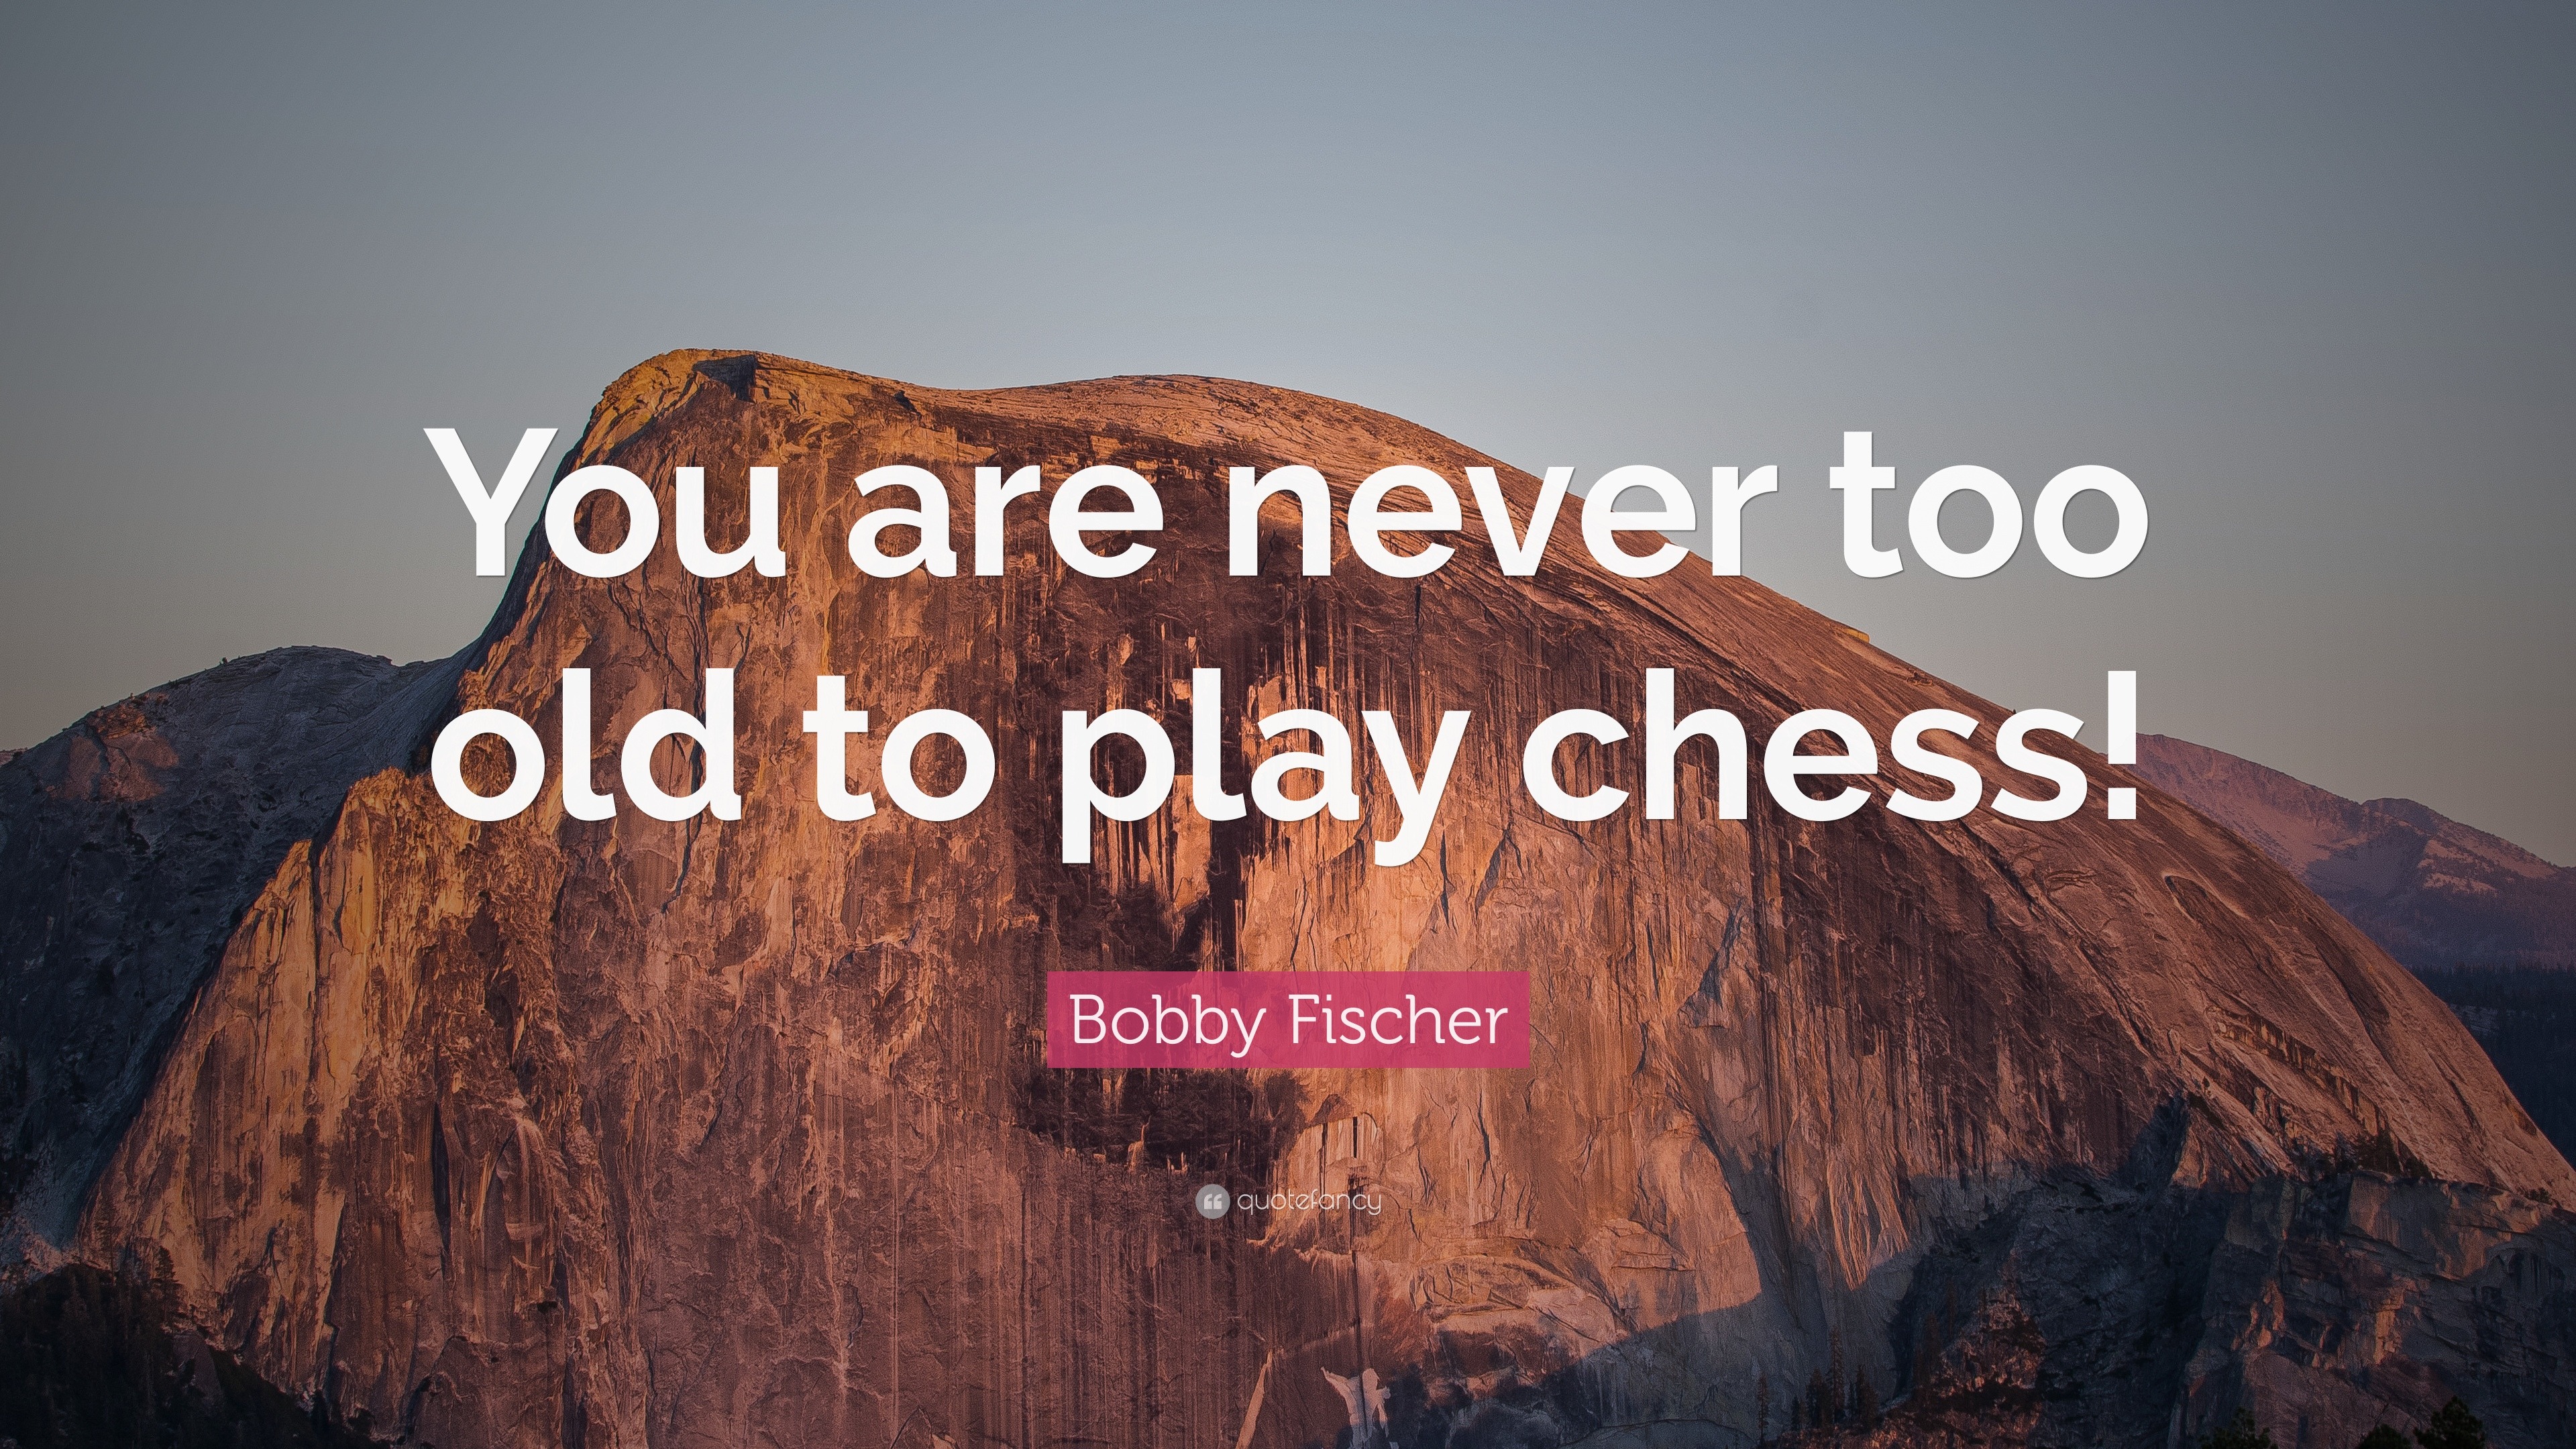 Bobby Fischer Quote: “You are never too old to play chess!”